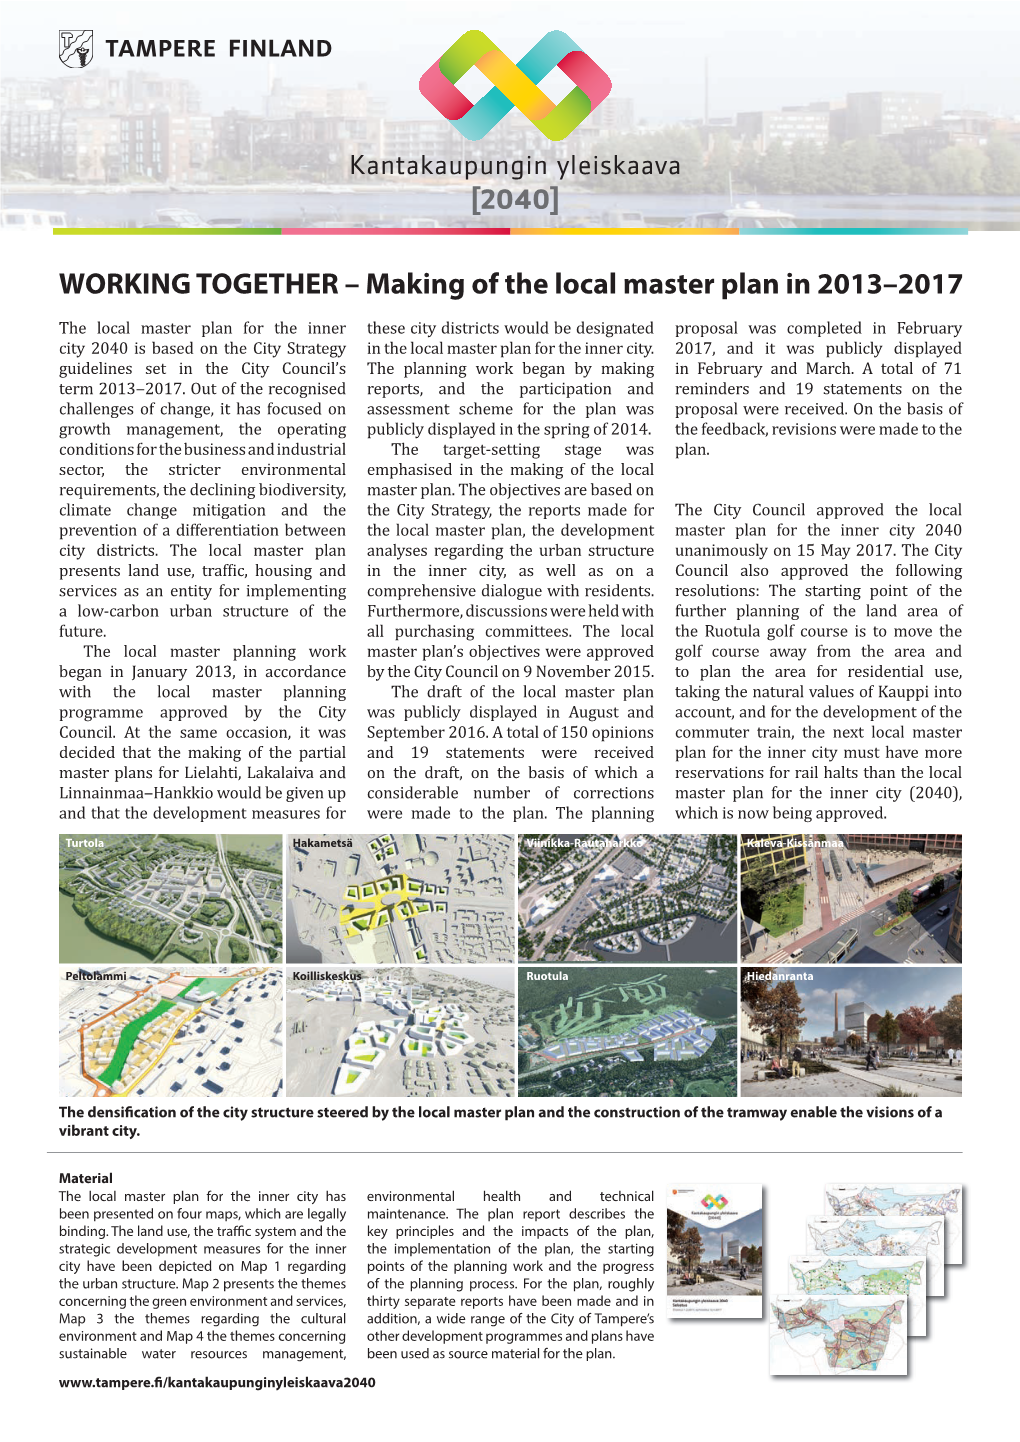 WORKING TOGETHER – Making of the Local Master Plan in 2013–2017